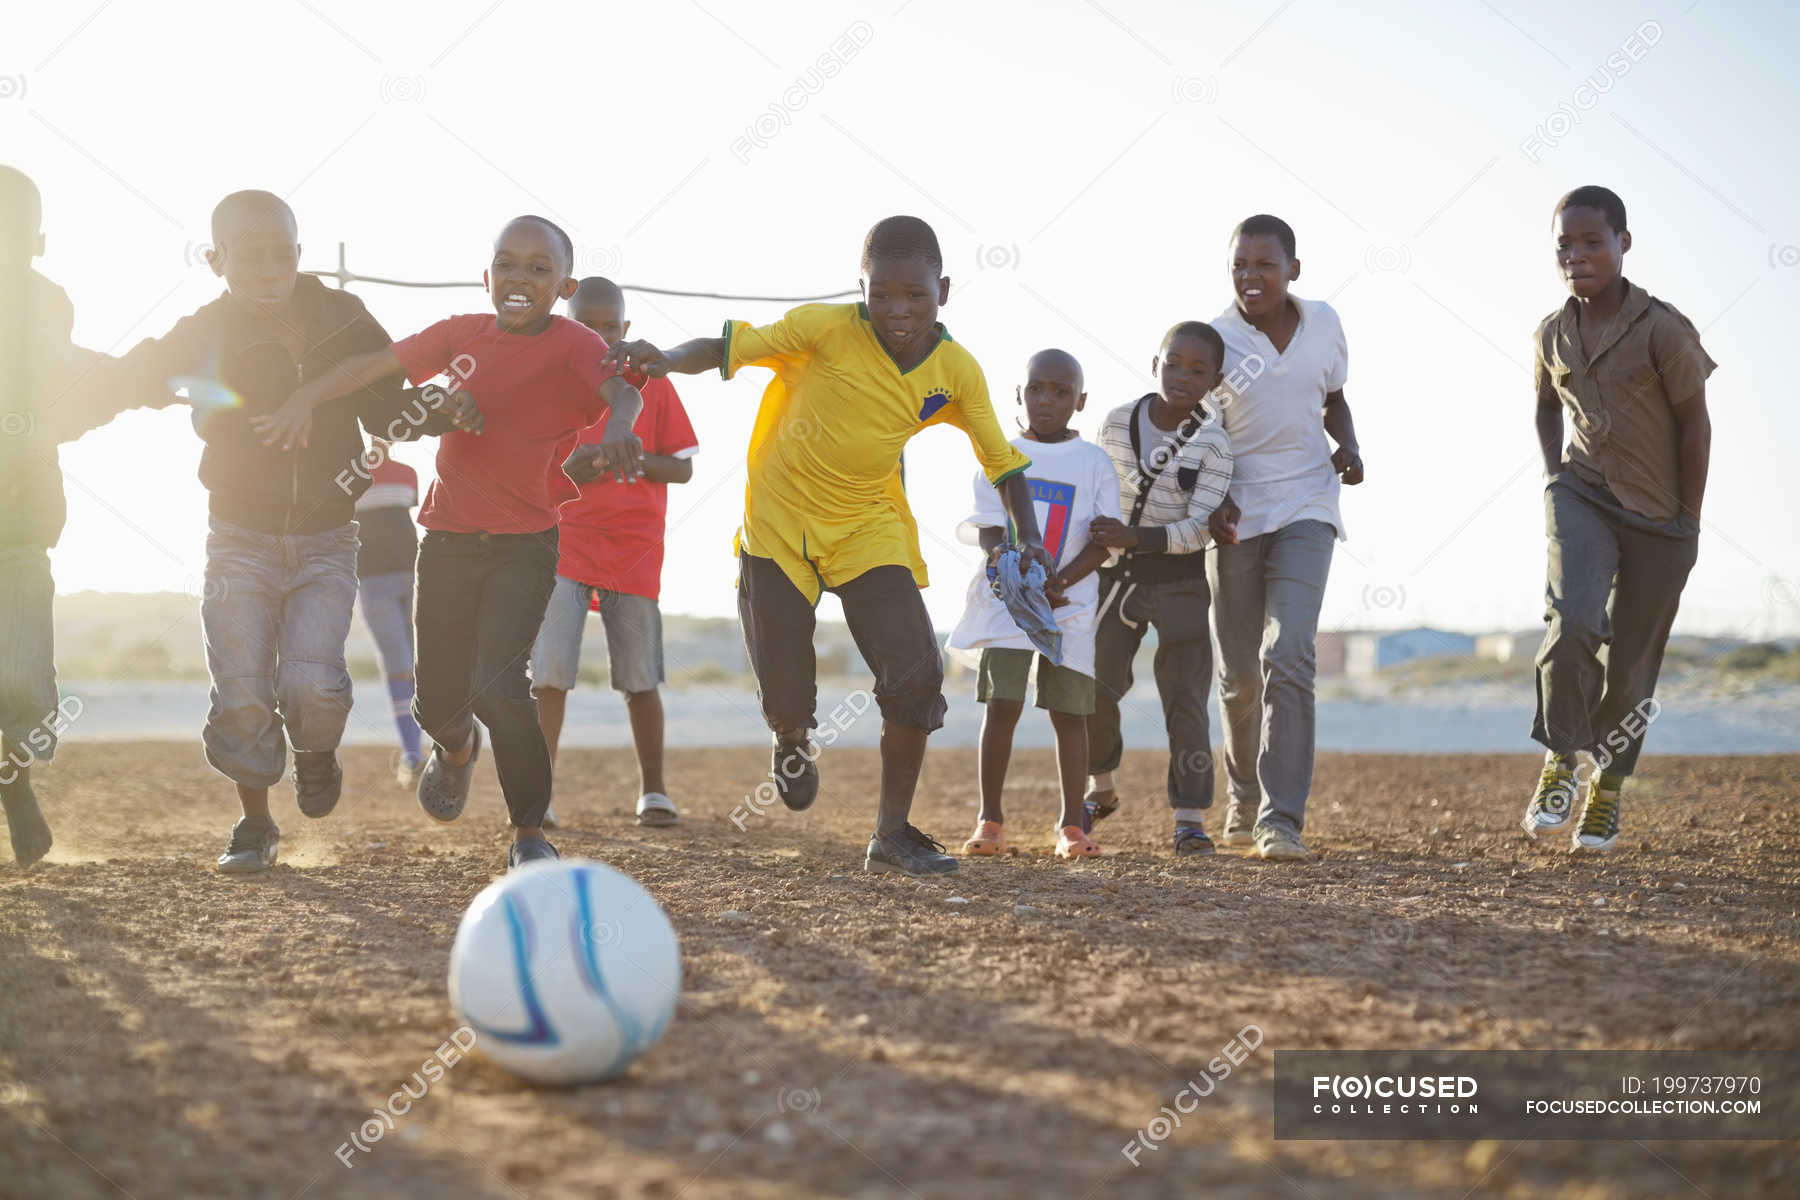 African playing soccer together in dirt field — teamwork, Casual Clothing - Photo | #199737970